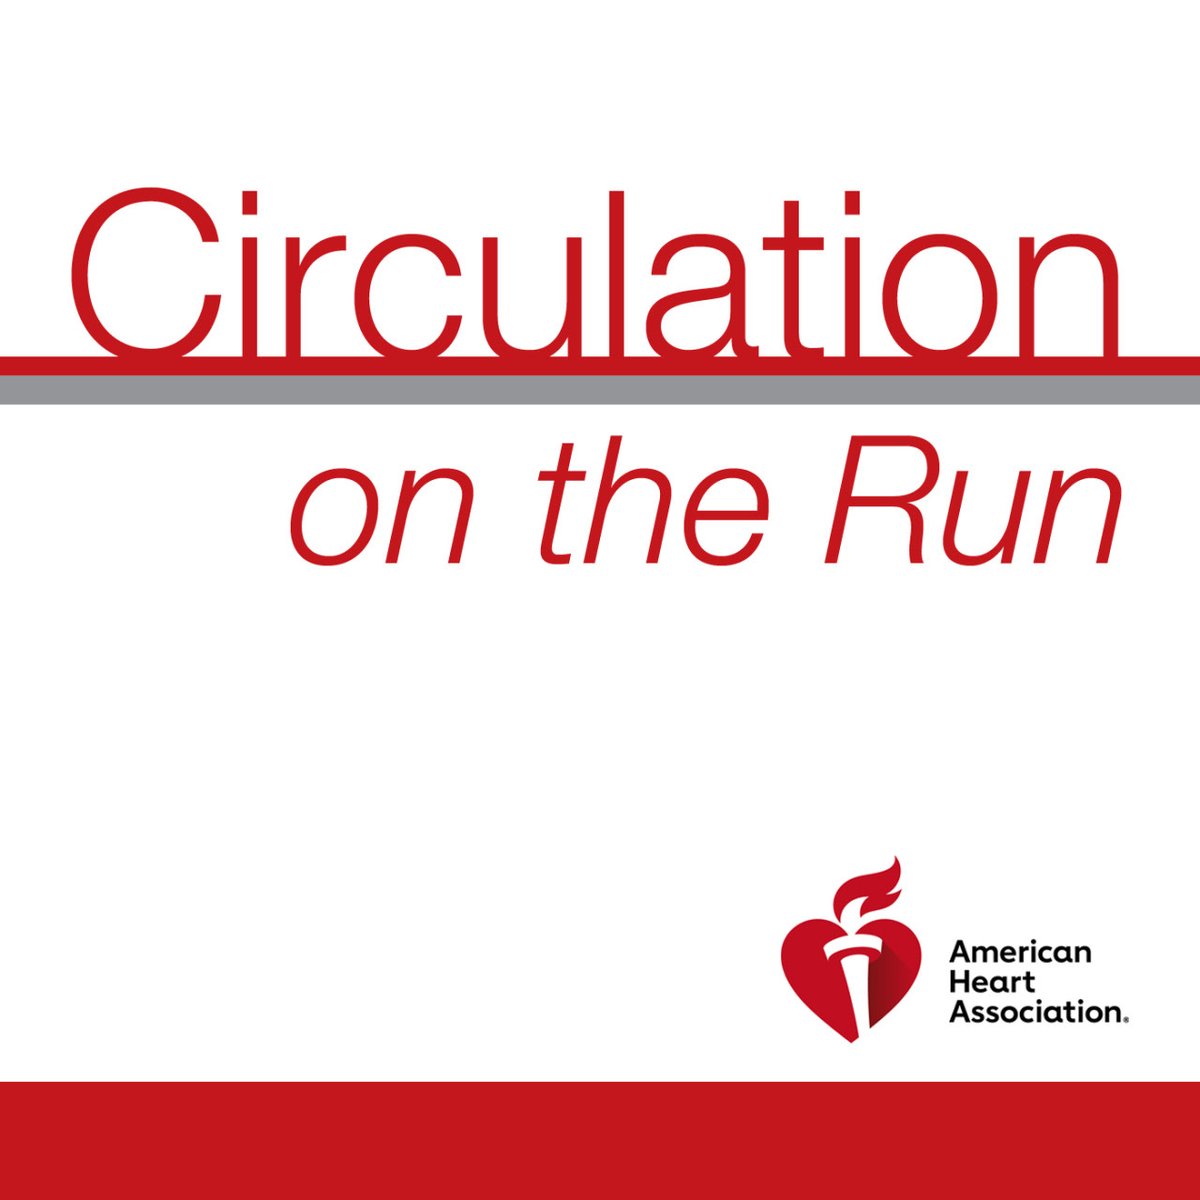 Subscribe to Circulation On The Run and join hosts Carolyn Lam and Greg Hundley as they go behind the scenes into the clinical significance of a featured article from @CircAHA @AHAScience. Subscribe wherever you get your podcasts, or find us at ahajrnls.org/3CAzKX8